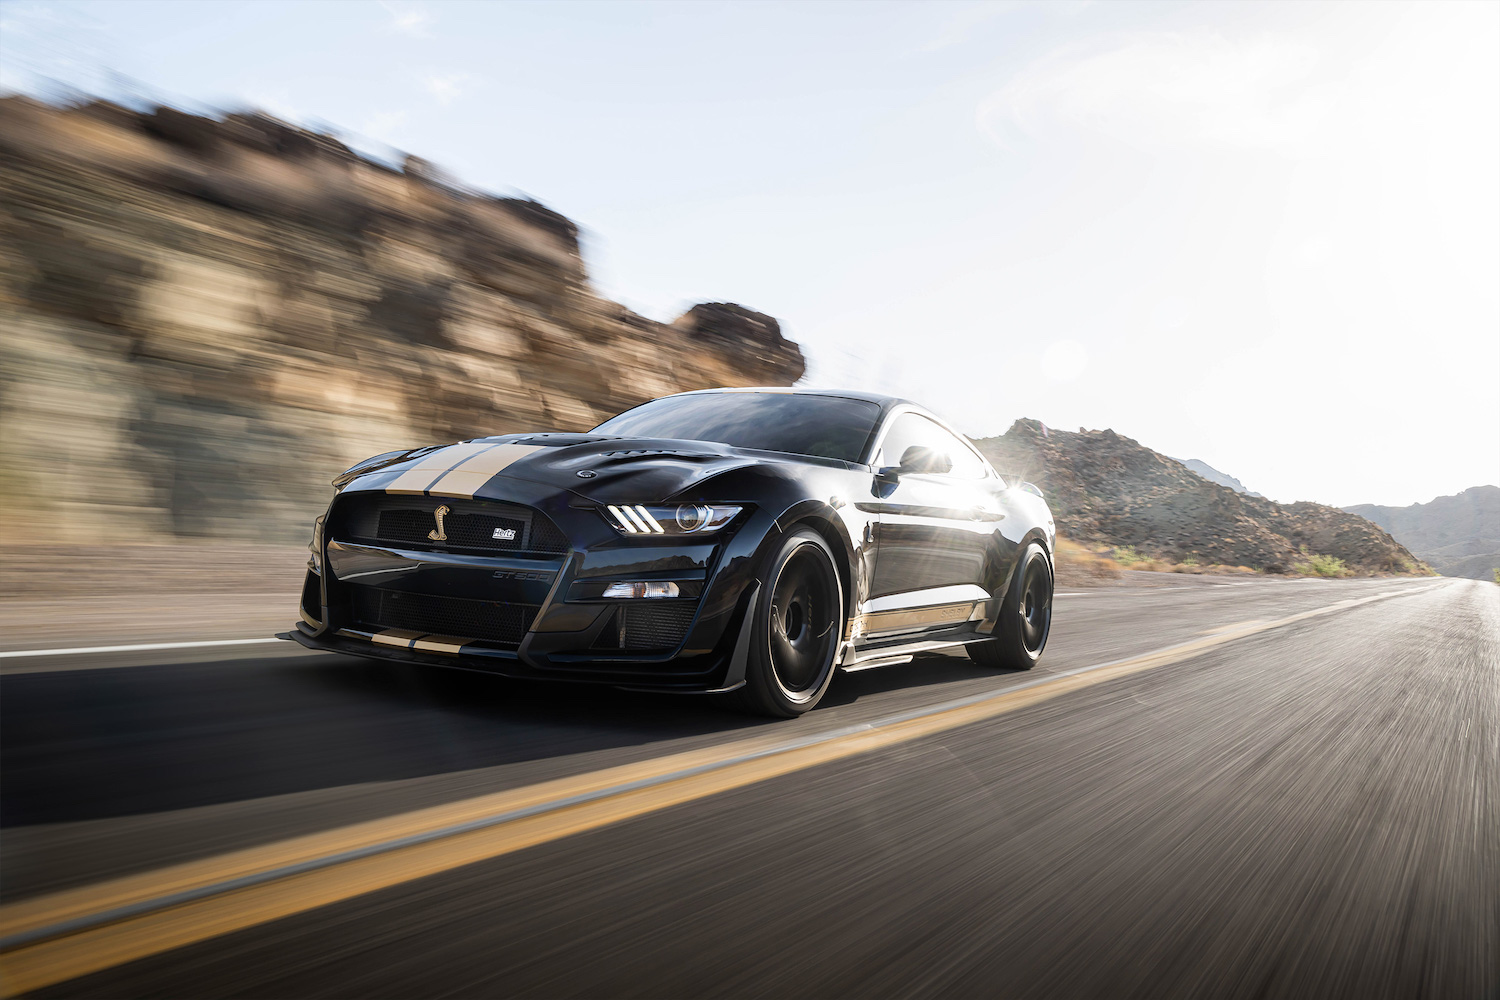 How The Need For Speed Mustang Drove So Well